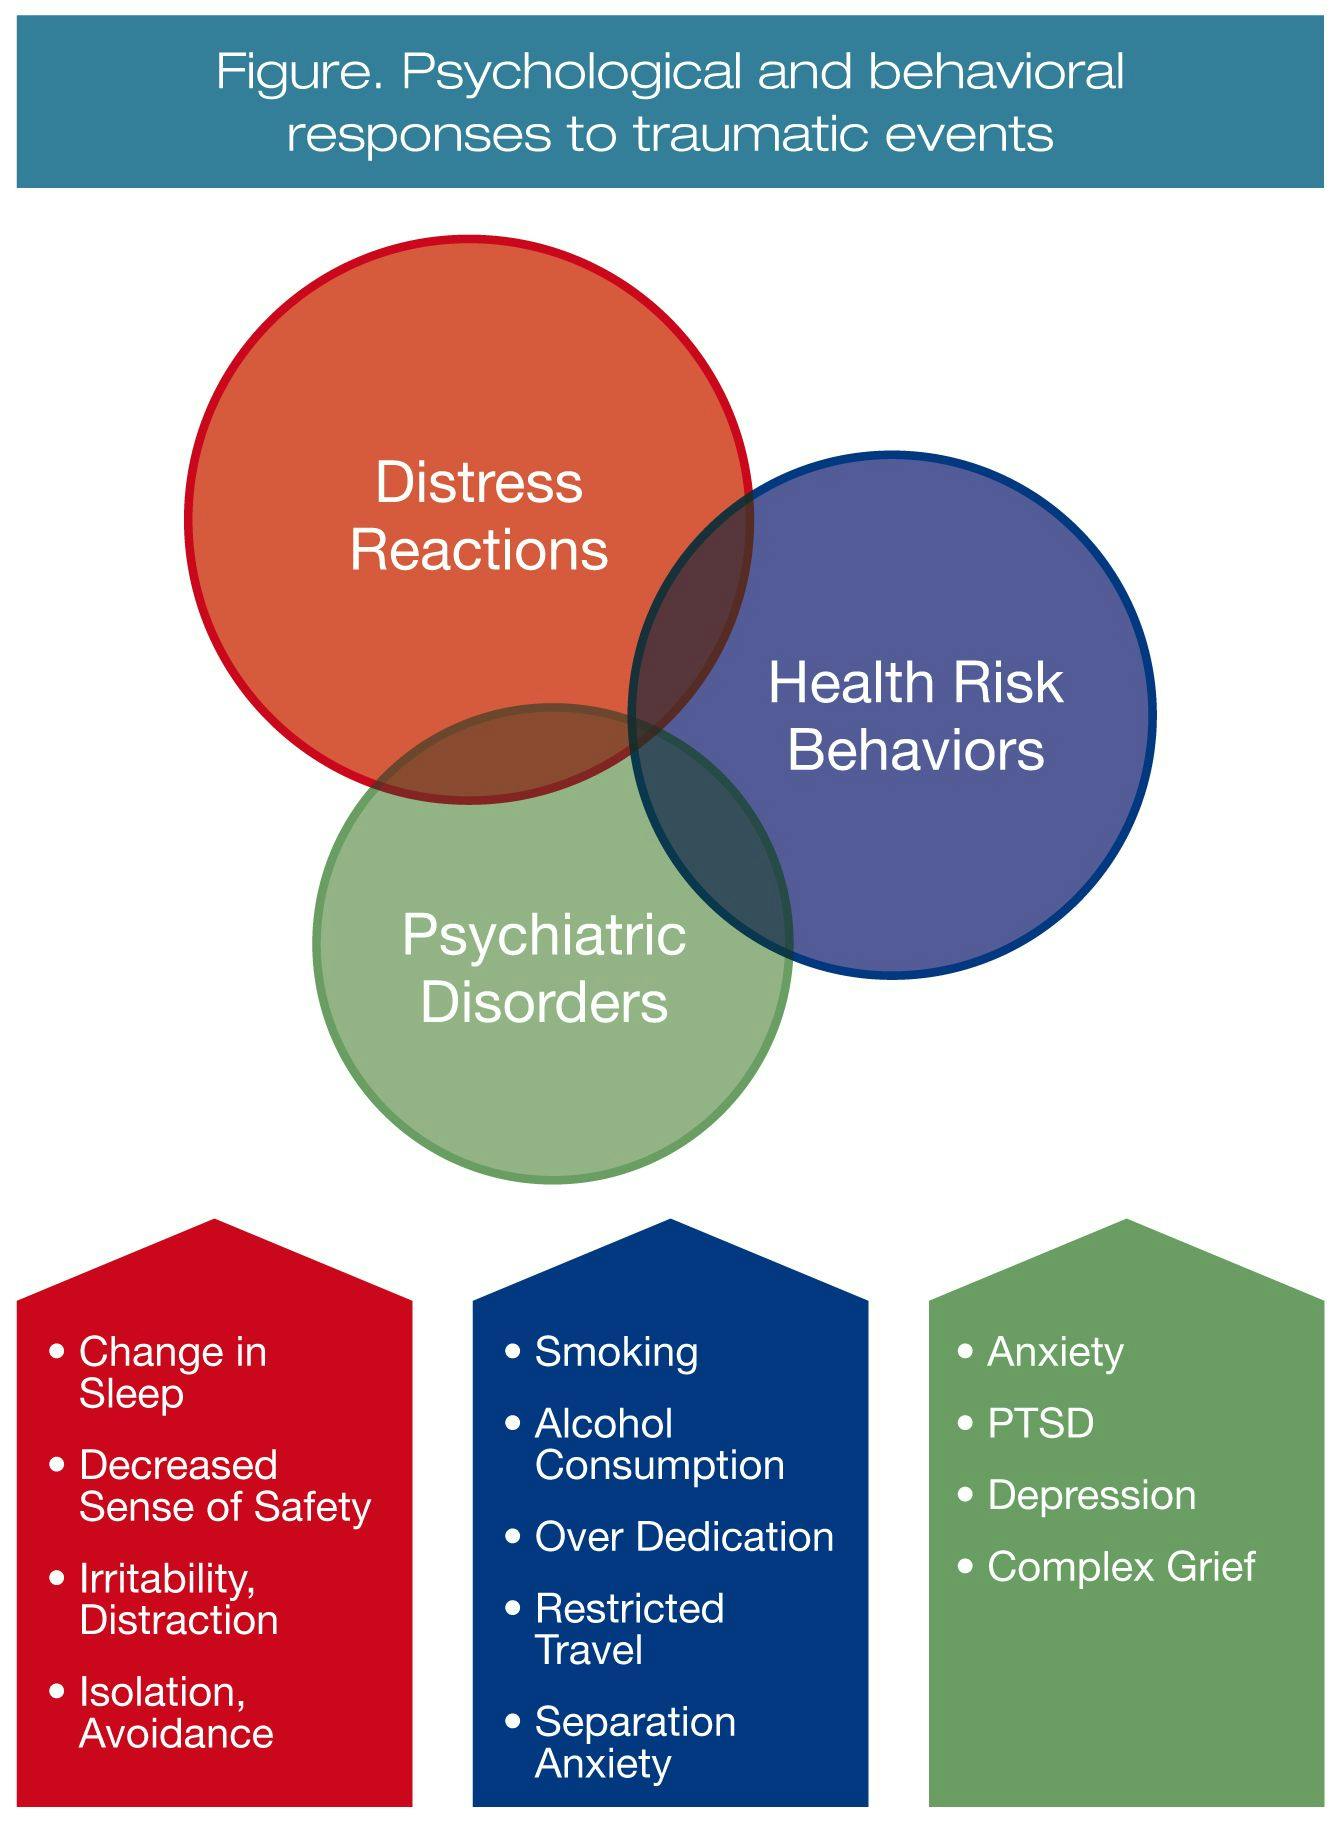 Psychological and behavioral responses to traumatic events